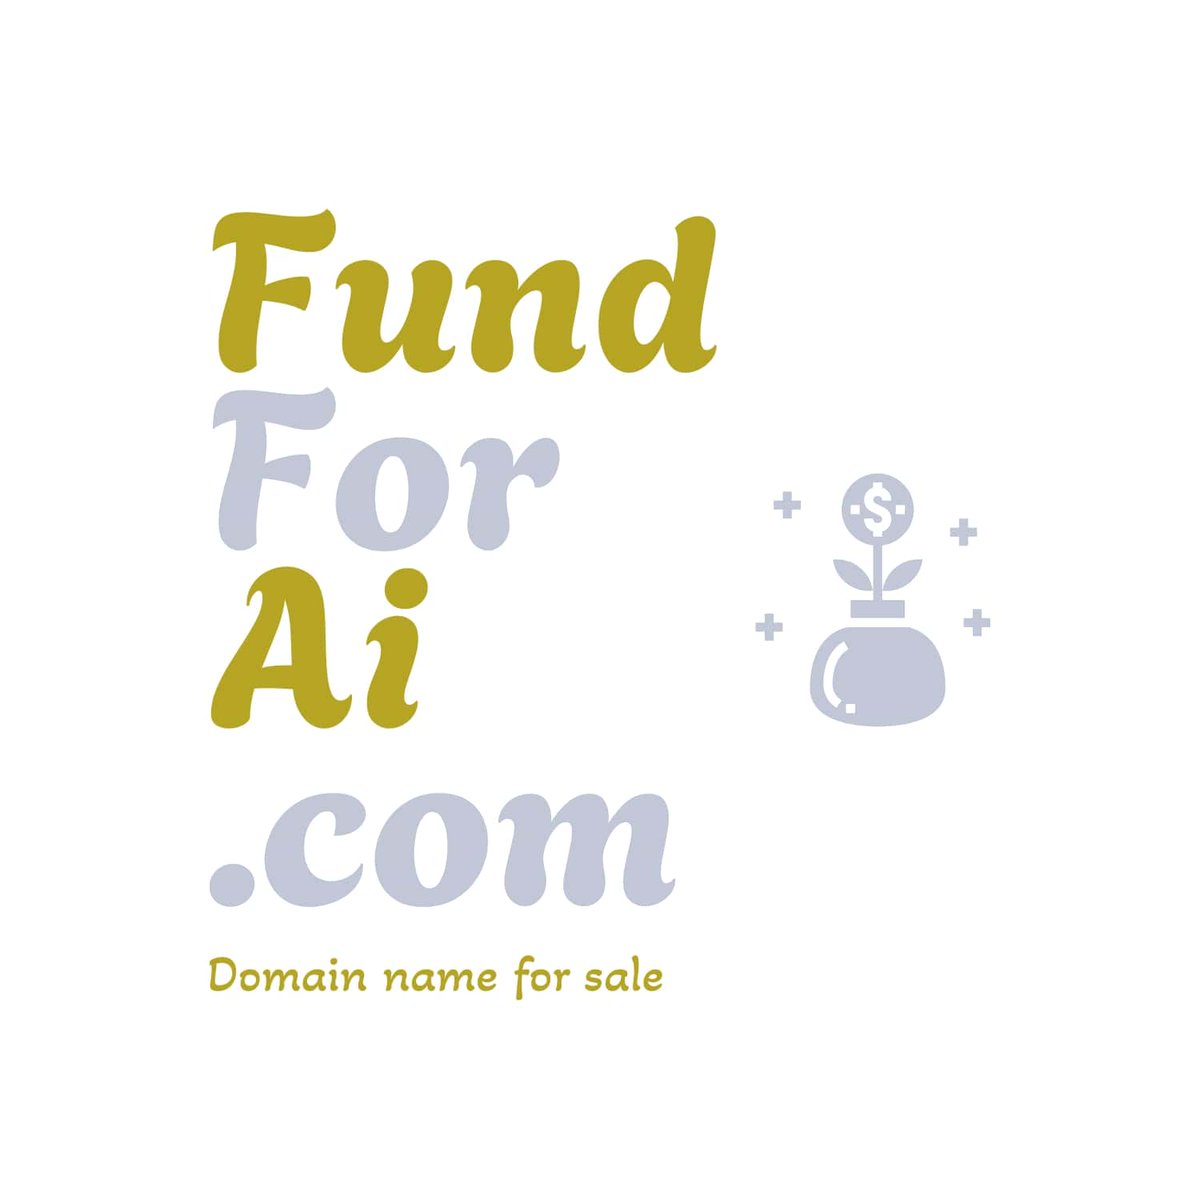 FundForAi.com
domain for sale

buy this domain: godaddy.com/domainsearch/f…

#fundraising #aifund #venture #capitalsolution #investments #aifunding #startup #bestai #OpenAI #Shore #kennedy #Americanfunds #indexfunds #Vanguard #studio #investors #founders #stocks #GoFundMe